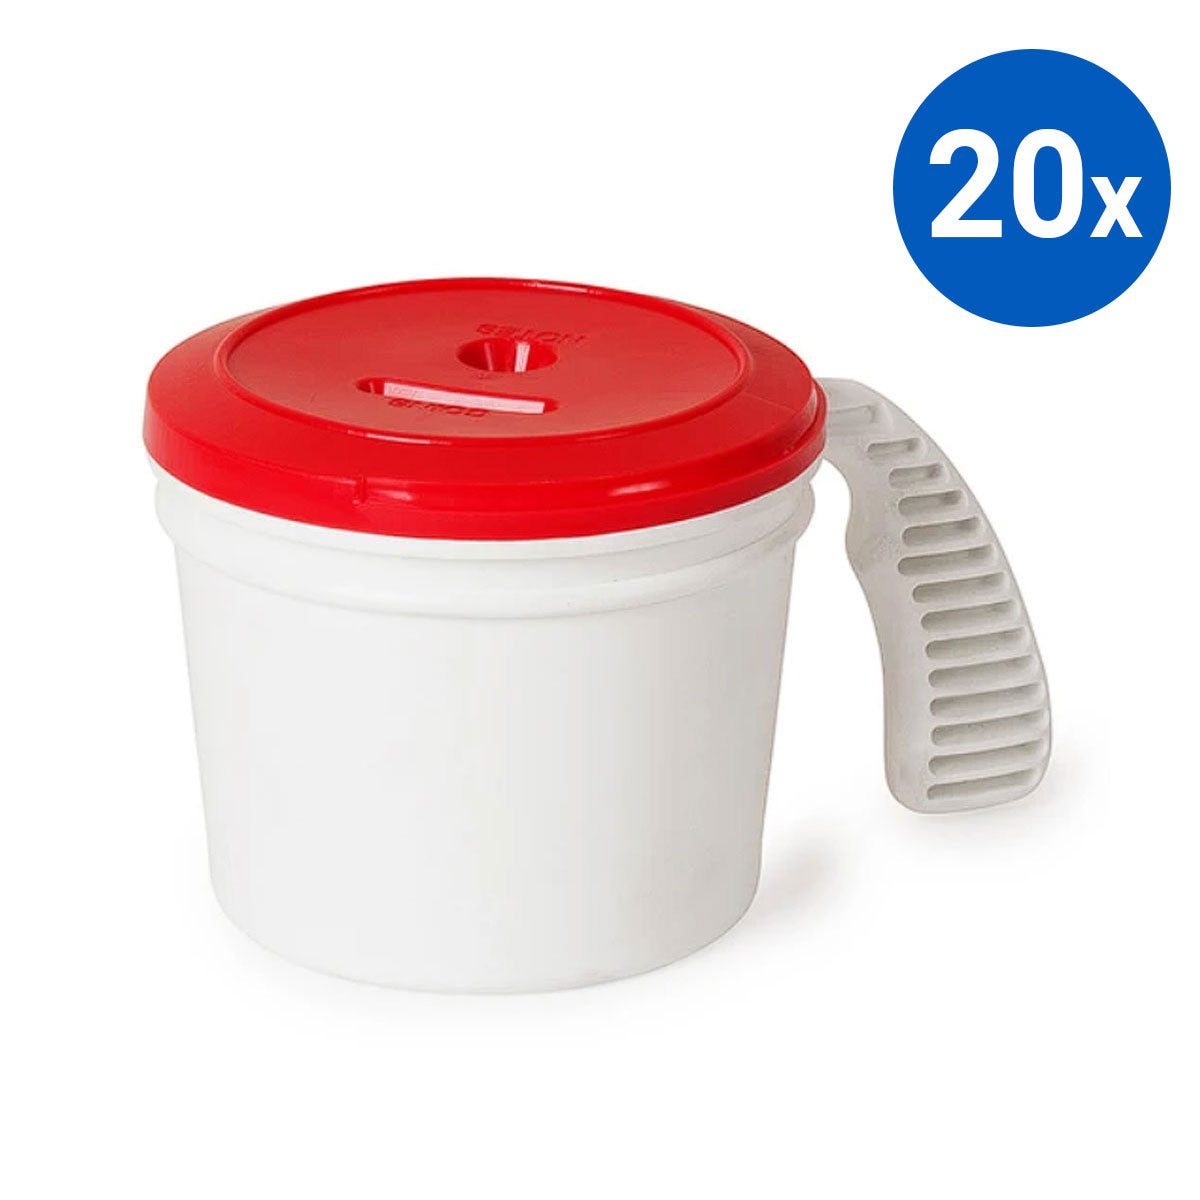 20x Collection Container Base and Standard Lid - Red